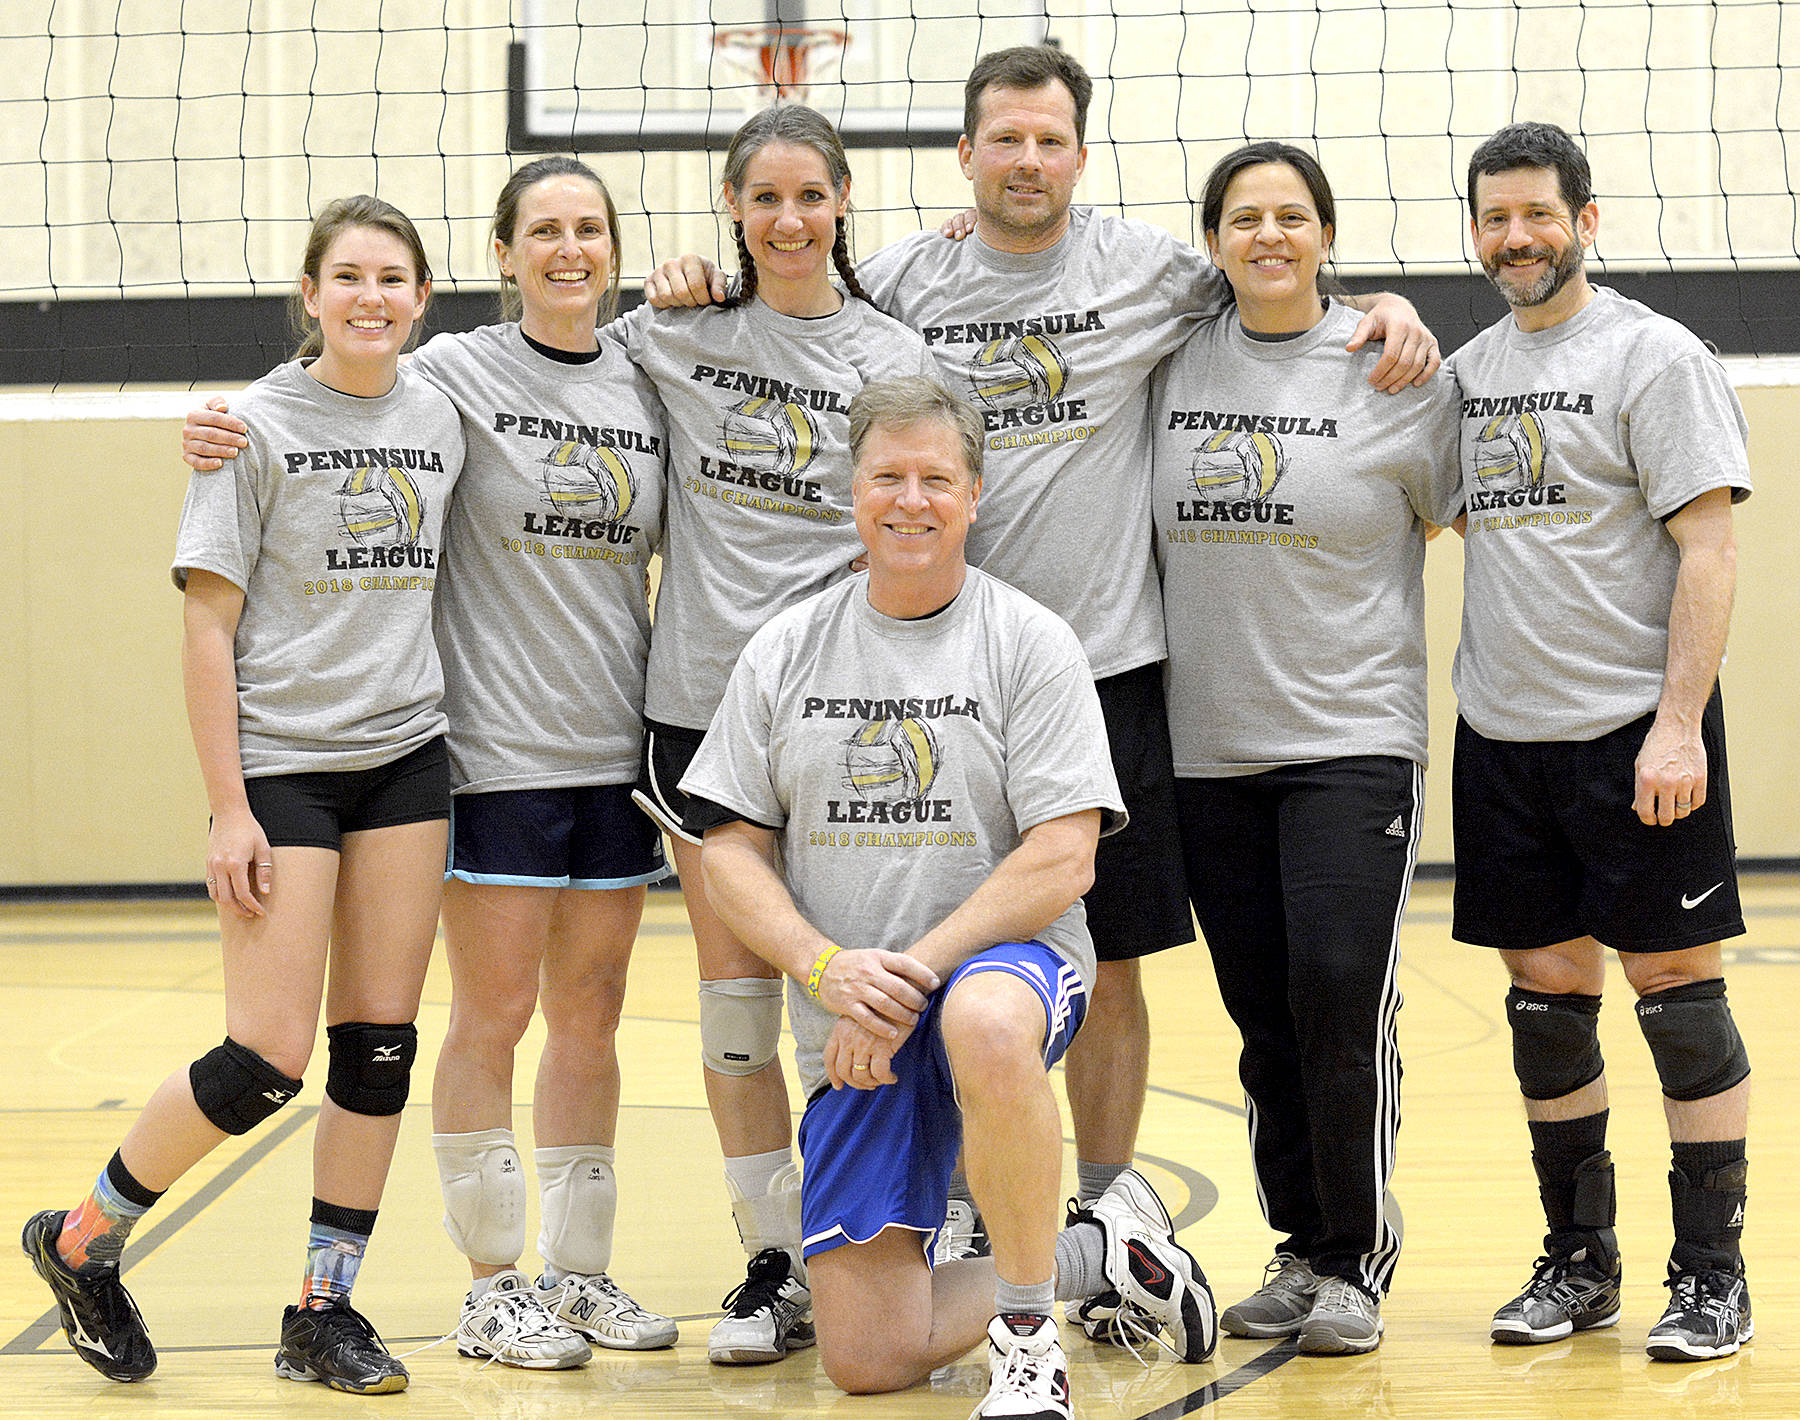 Peak Performance Therapy defeated KR3W 25-14, 27-25 Thursday night in the championship match to win the 2018 Peninsula Volleyball League title. Peak Performance players are from left Alyssa Wetzler, Christine Halberg, Nancy LeBlanc, Greg Halberg, Rebekah Monet and Eric Palenik. Kneeling is Tom Lotz.